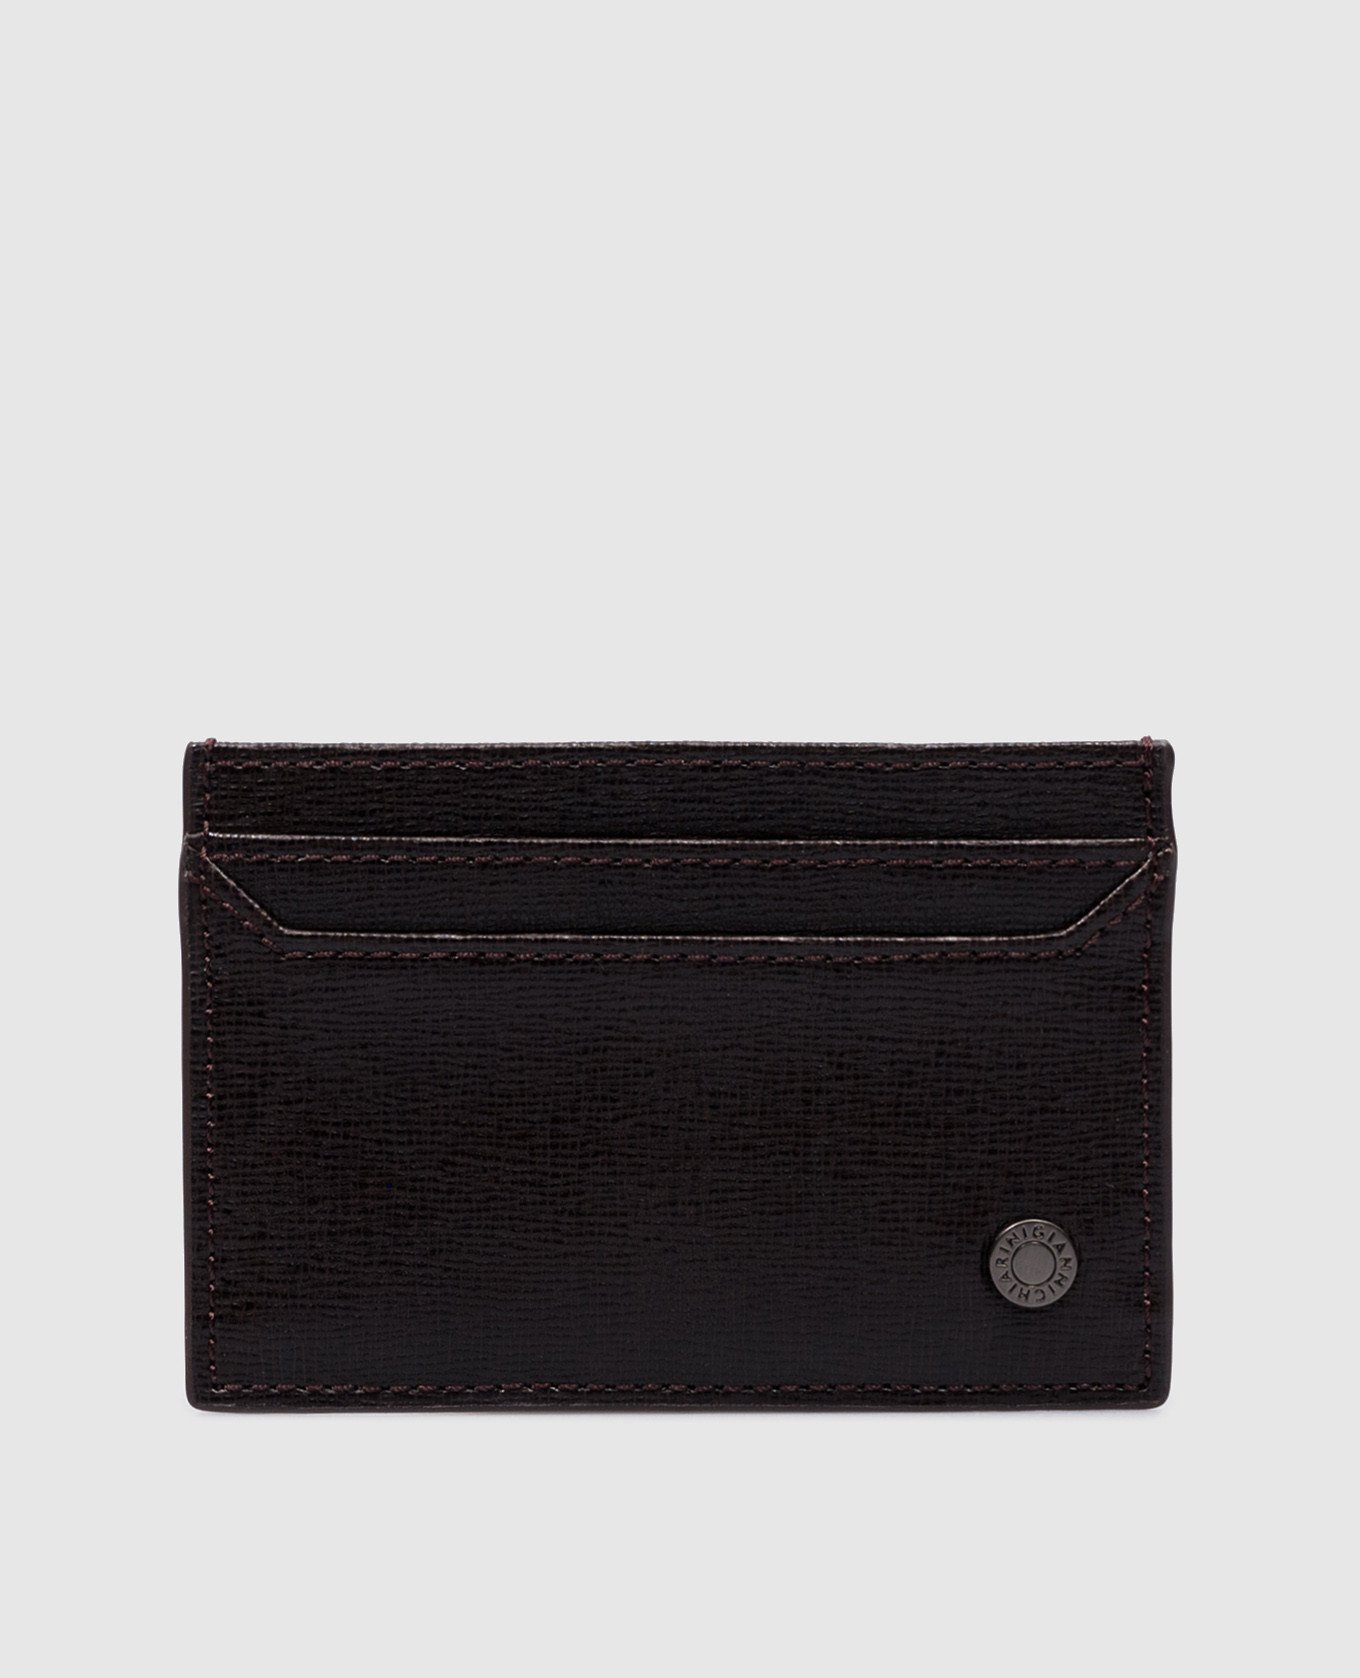 Brown leather cardholder with embossed logo